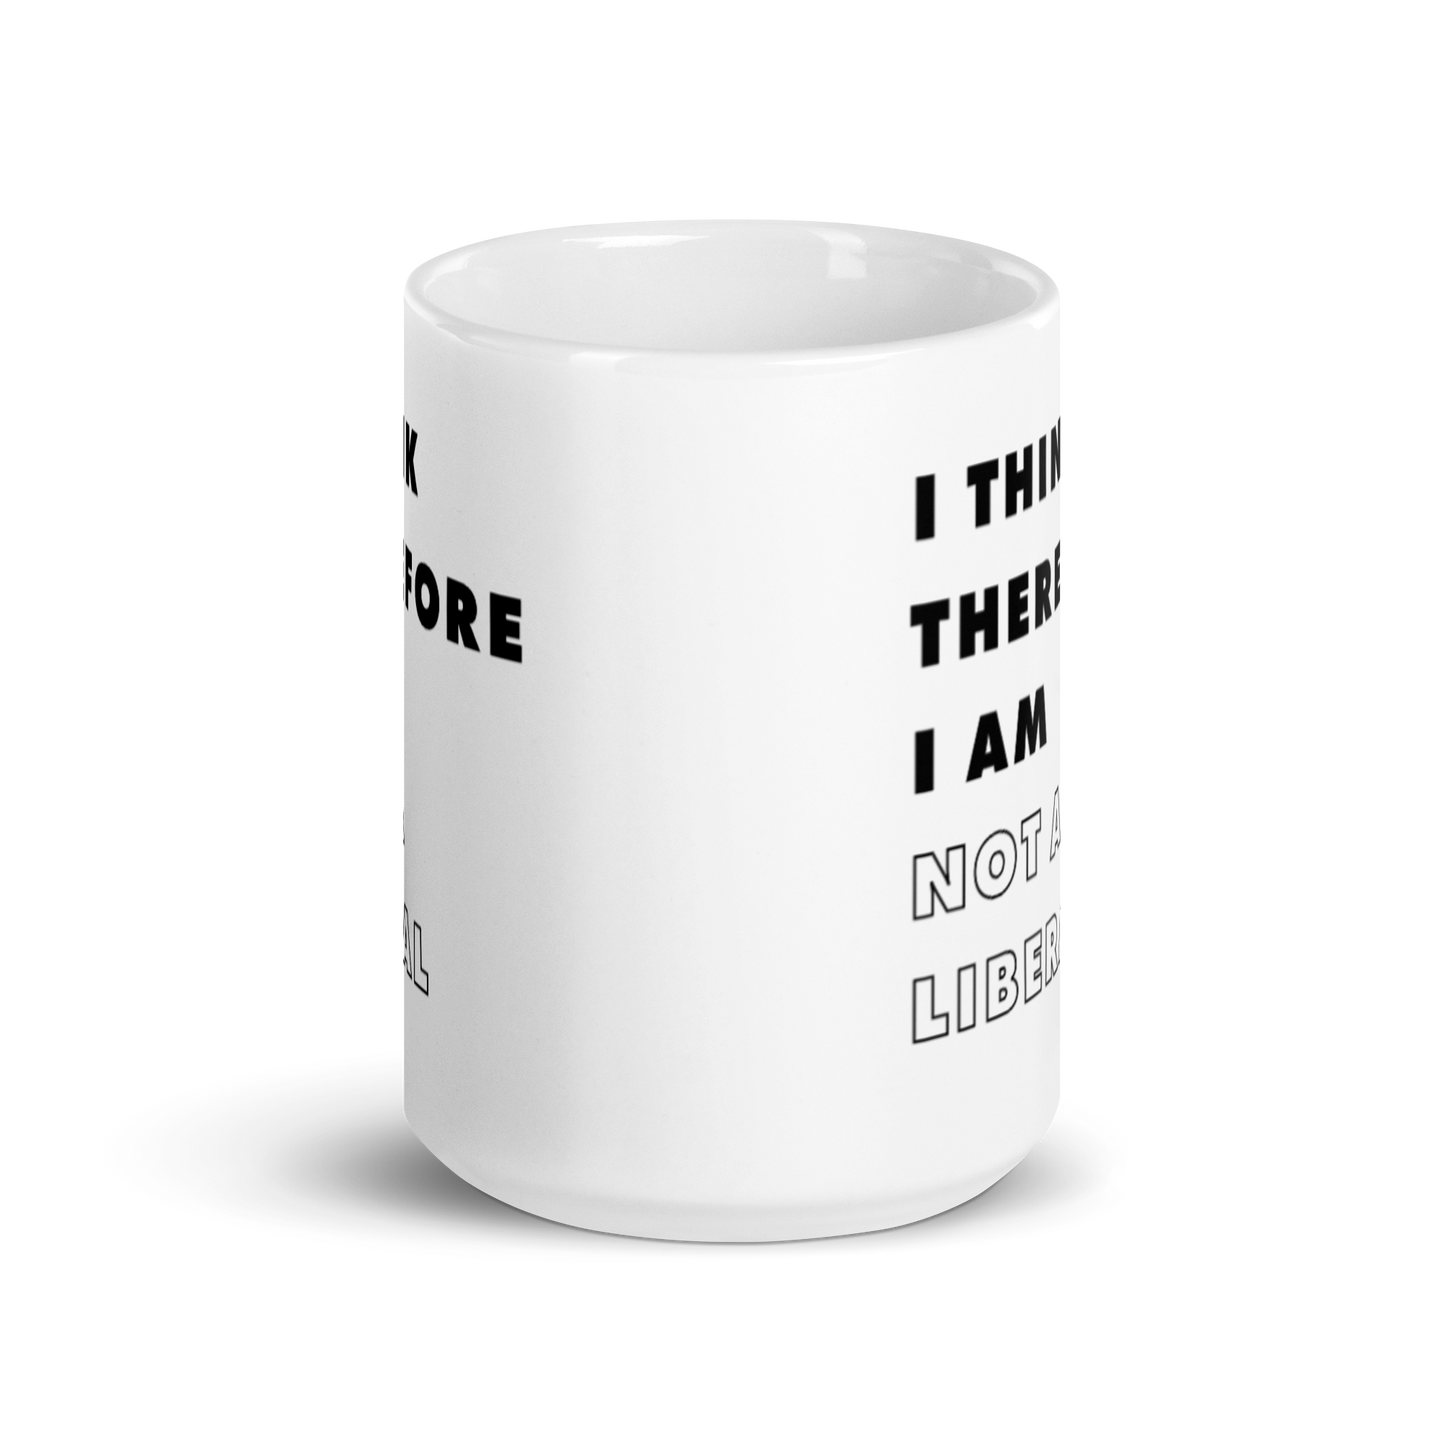 I Think Therefore I Am Not A Liberal Mug